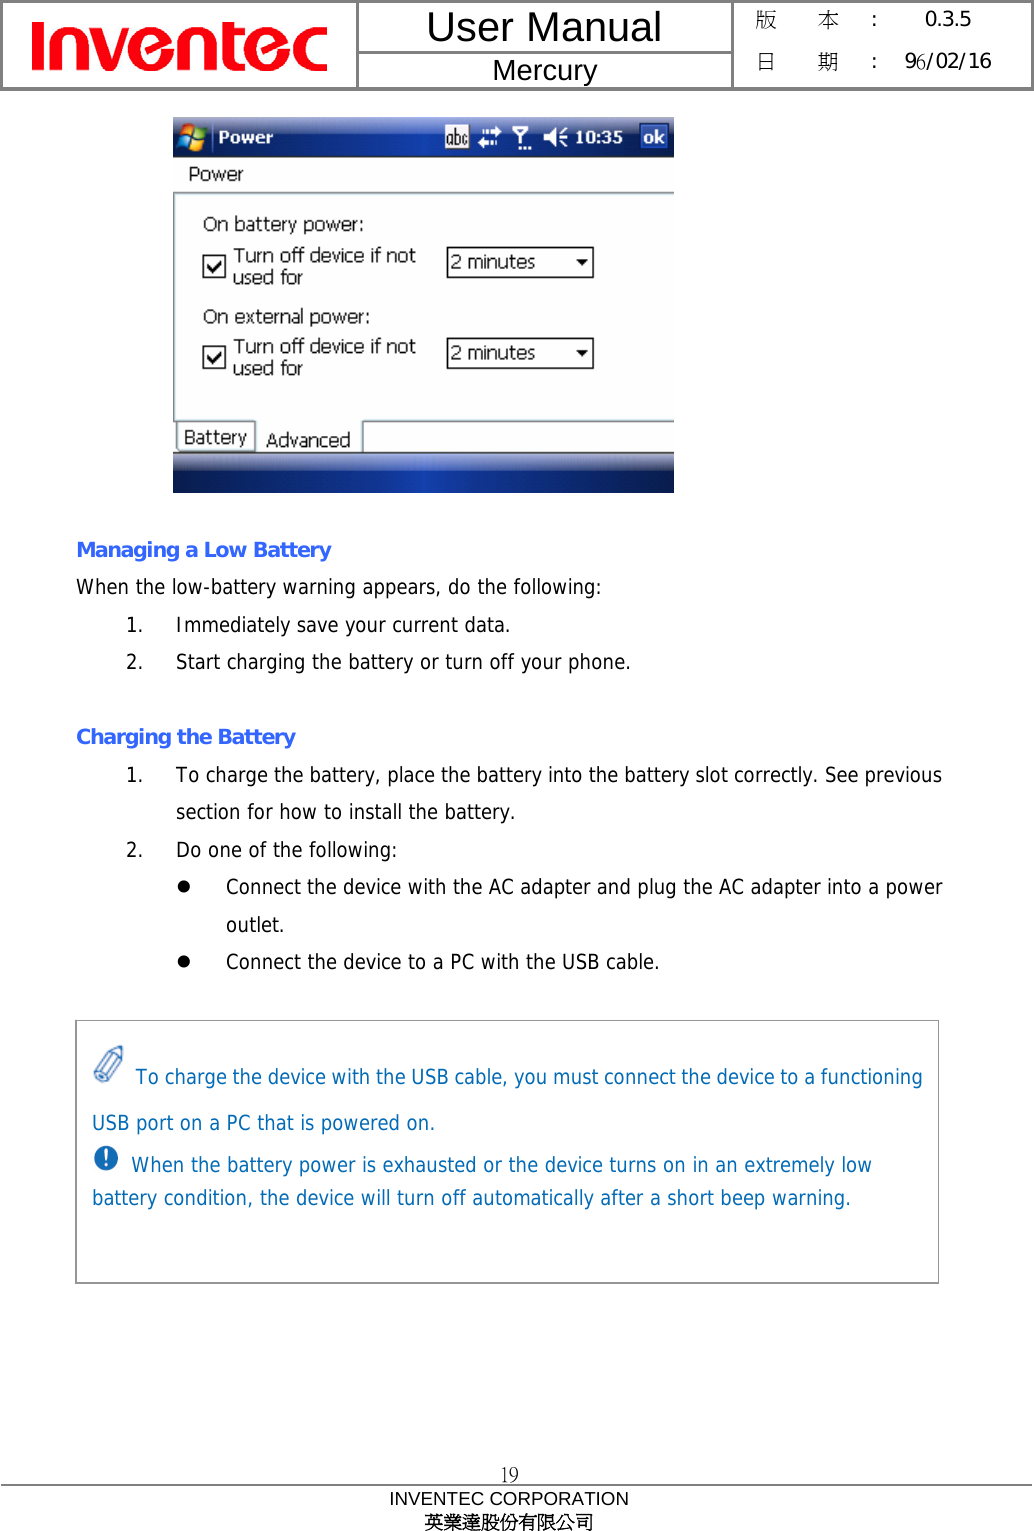 User Manual  Mercury 版    本 :  0.3.5 日    期 : 96/02/16  19 INVENTEC CORPORATION 英業達股份有限公司    Managing a Low Battery When the low-battery warning appears, do the following: 1. Immediately save your current data. 2. Start charging the battery or turn off your phone.  Charging the Battery 1. To charge the battery, place the battery into the battery slot correctly. See previous section for how to install the battery. 2. Do one of the following: z Connect the device with the AC adapter and plug the AC adapter into a power outlet. z Connect the device to a PC with the USB cable.           To charge the device with the USB cable, you must connect the device to a functioning USB port on a PC that is powered on.  When the battery power is exhausted or the device turns on in an extremely low battery condition, the device will turn off automatically after a short beep warning. 